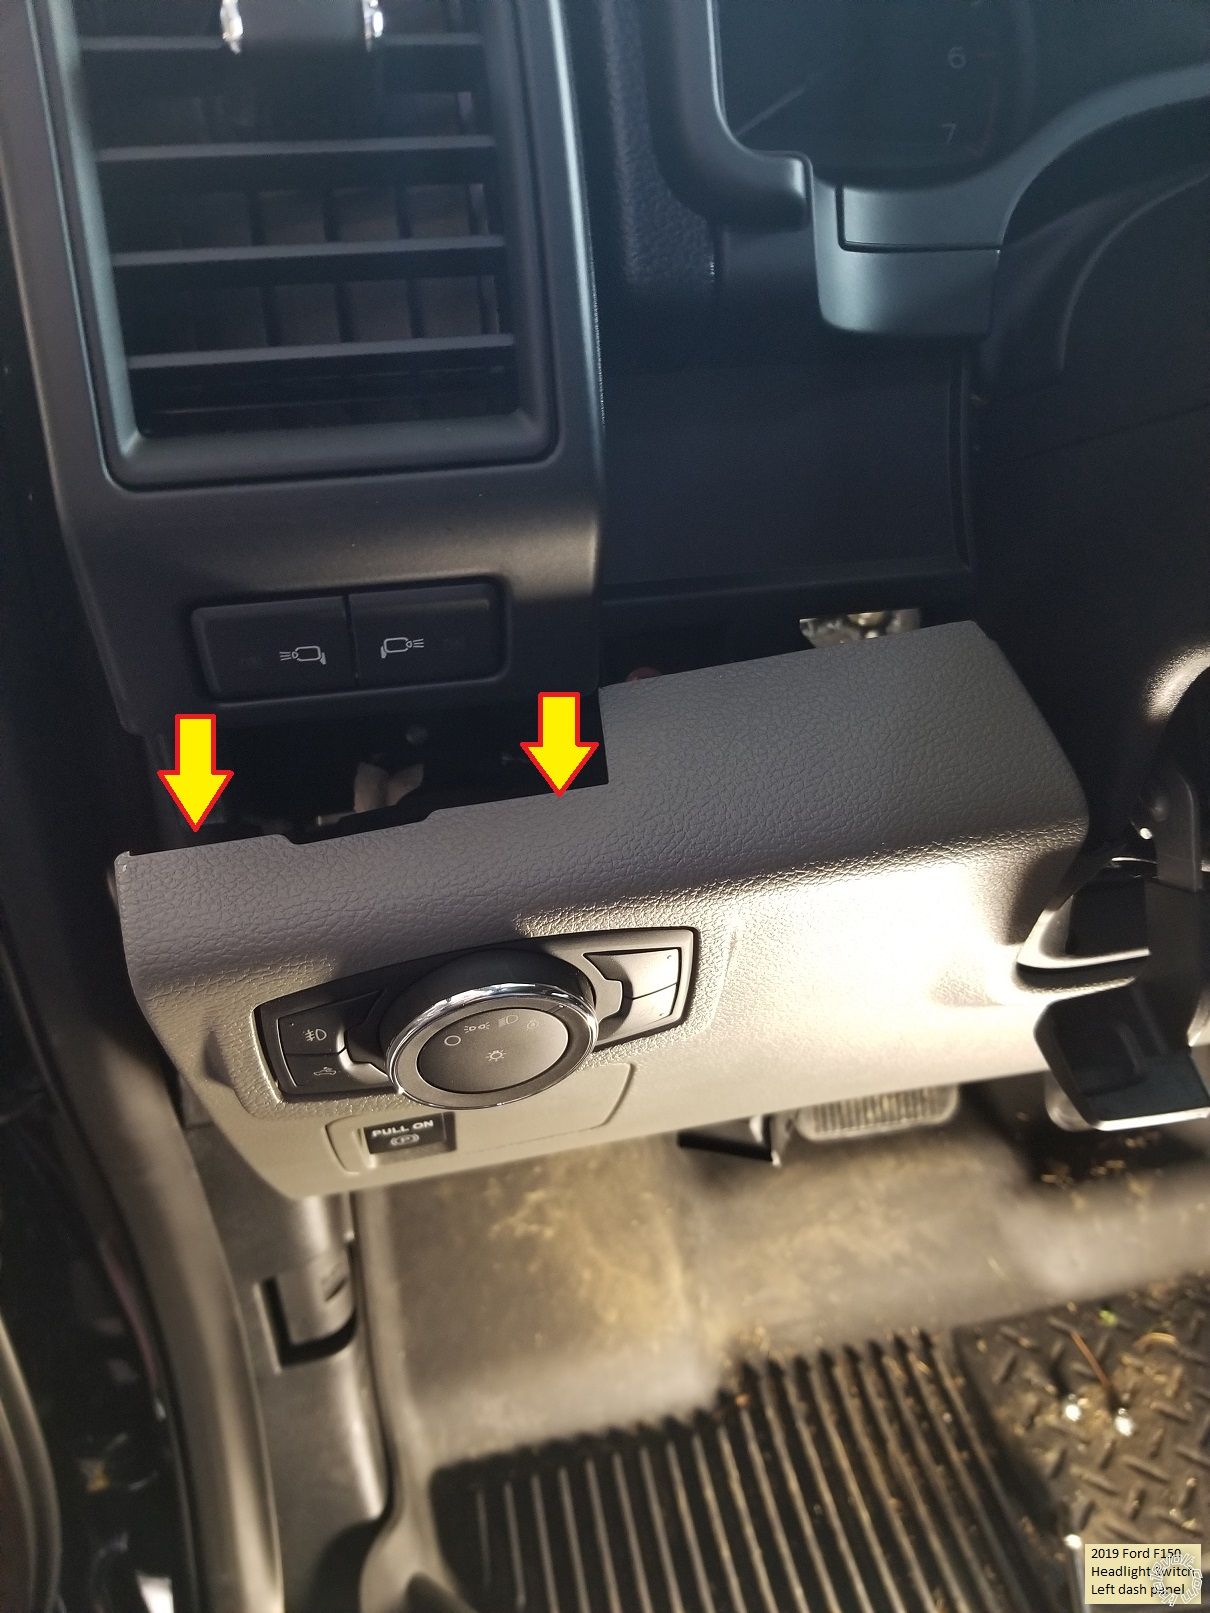 2015-2019 Ford F-150 Stand Alone Remote Start Pictorial -- posted image.